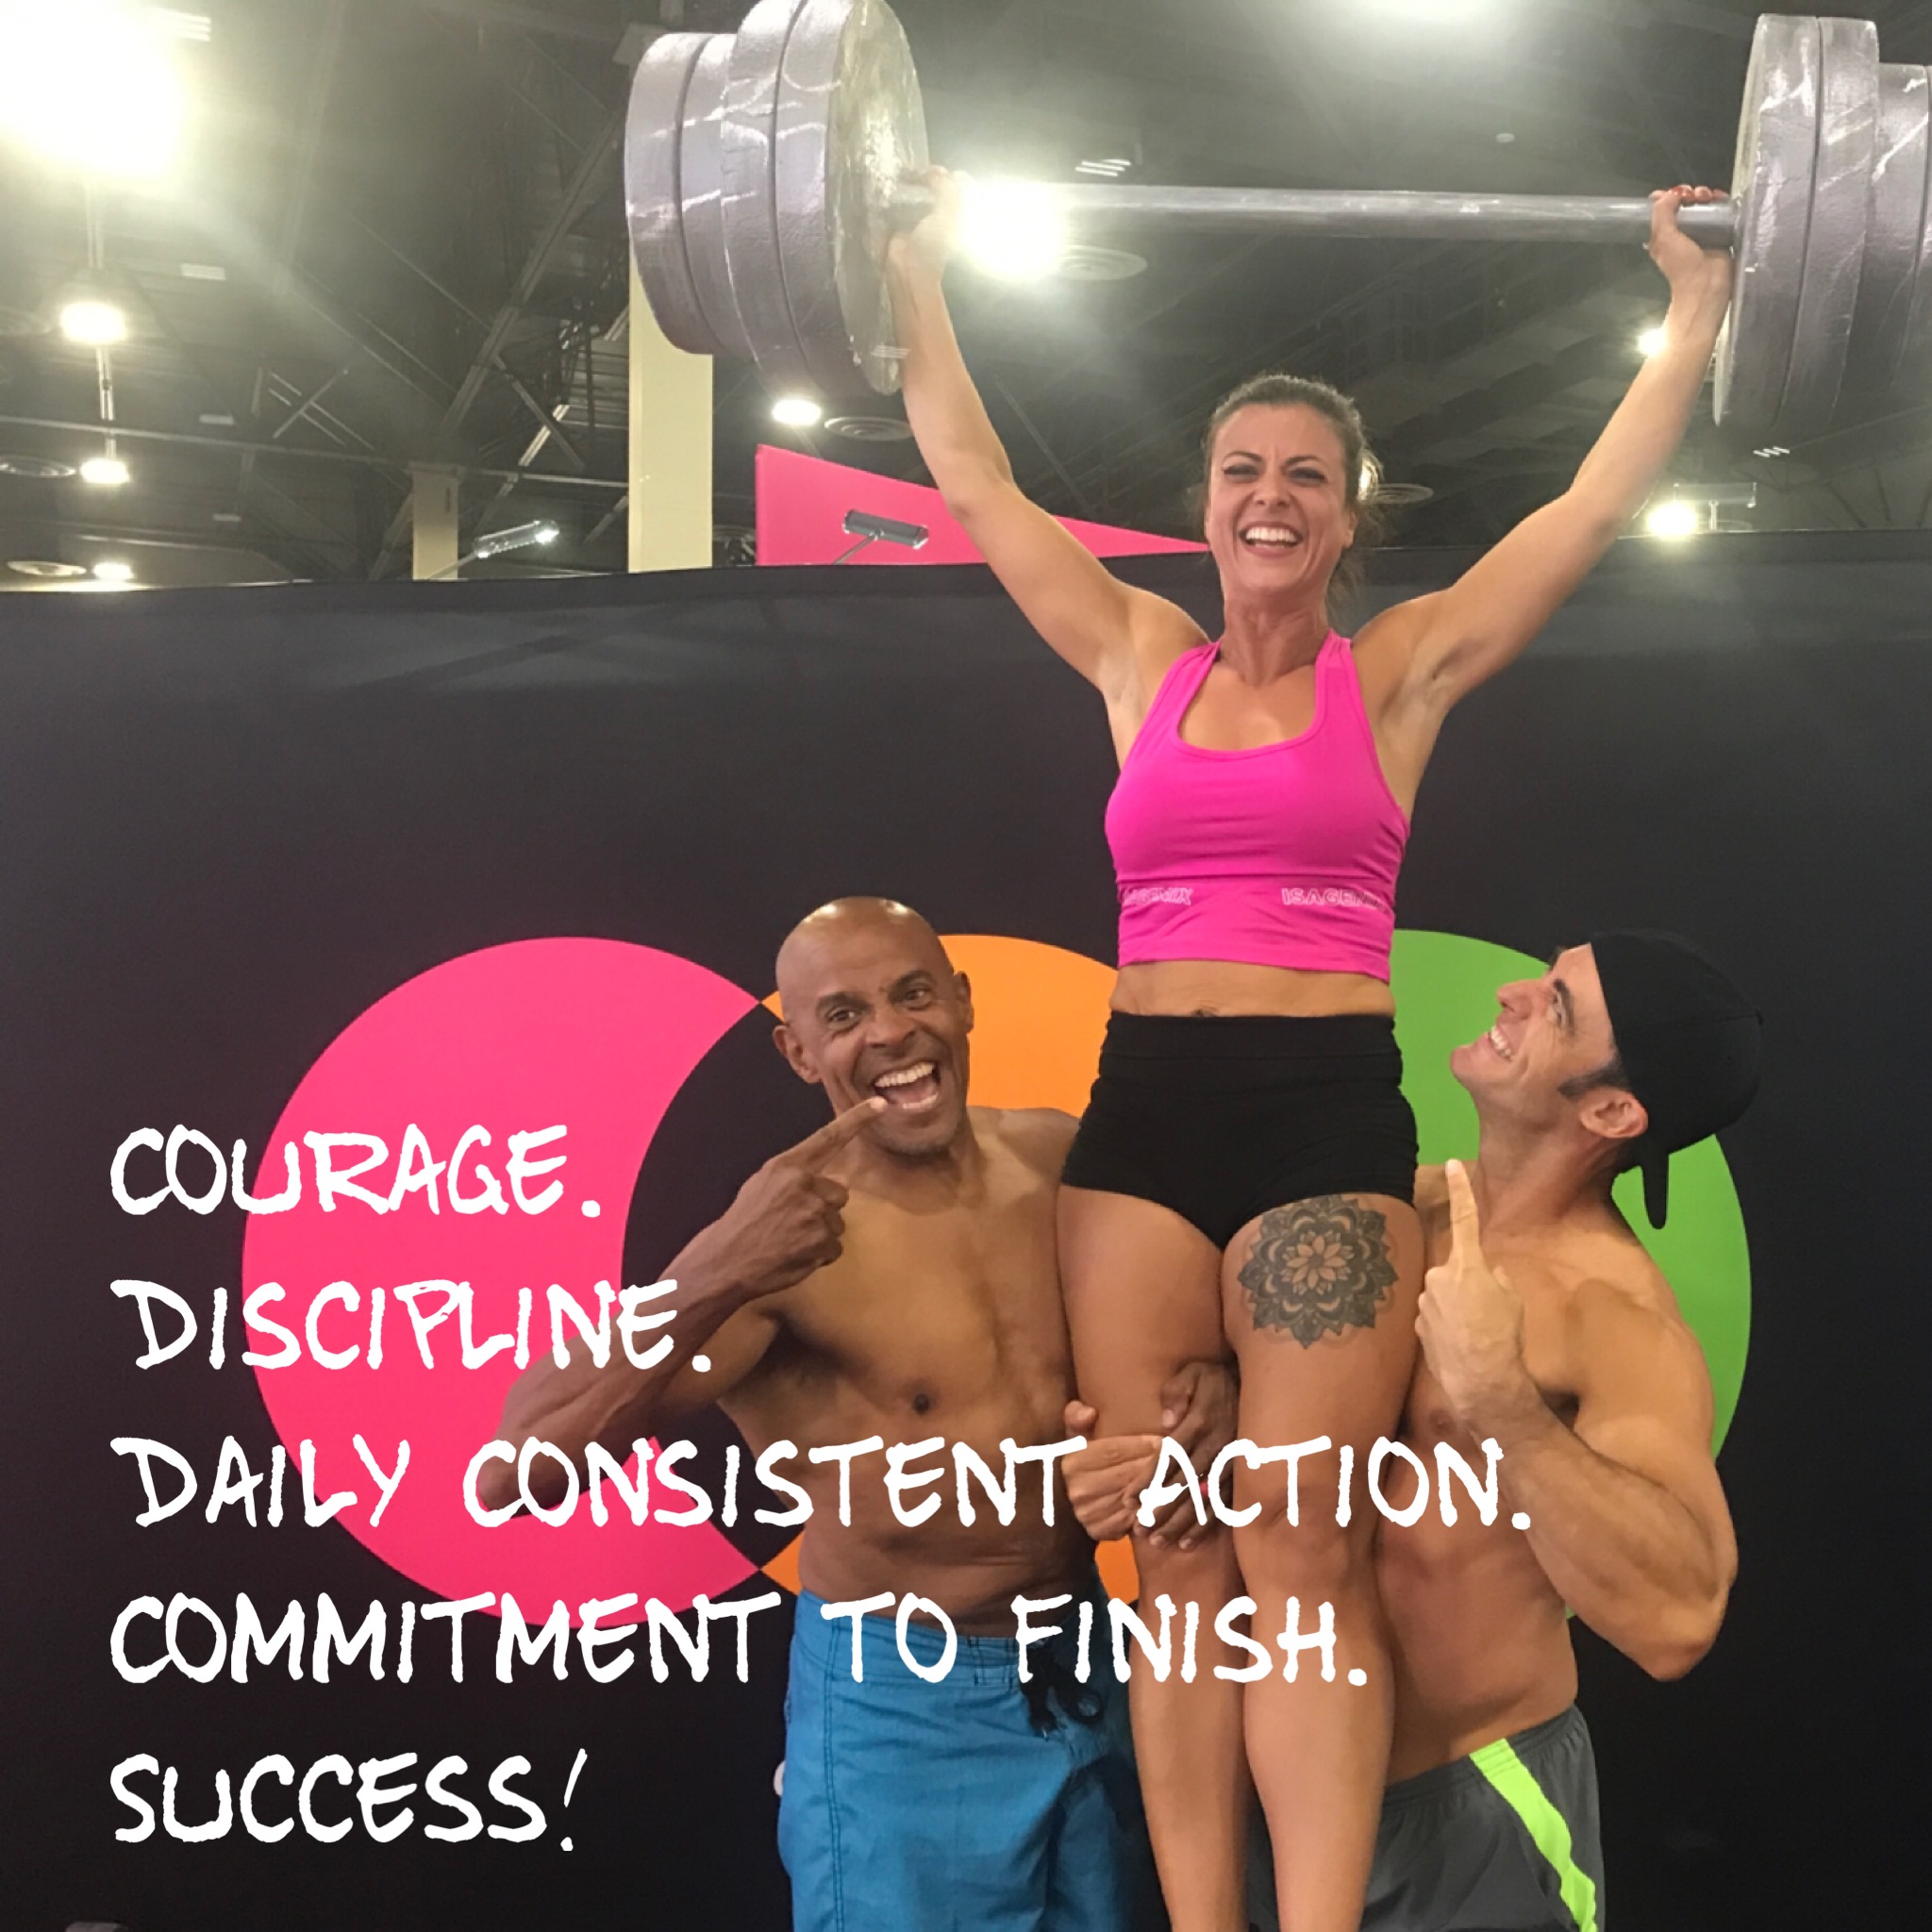 Helen, Jimmie and Jason: 2017 Isabody Challenge Grand Prize Winner, Runner Up and Finalist